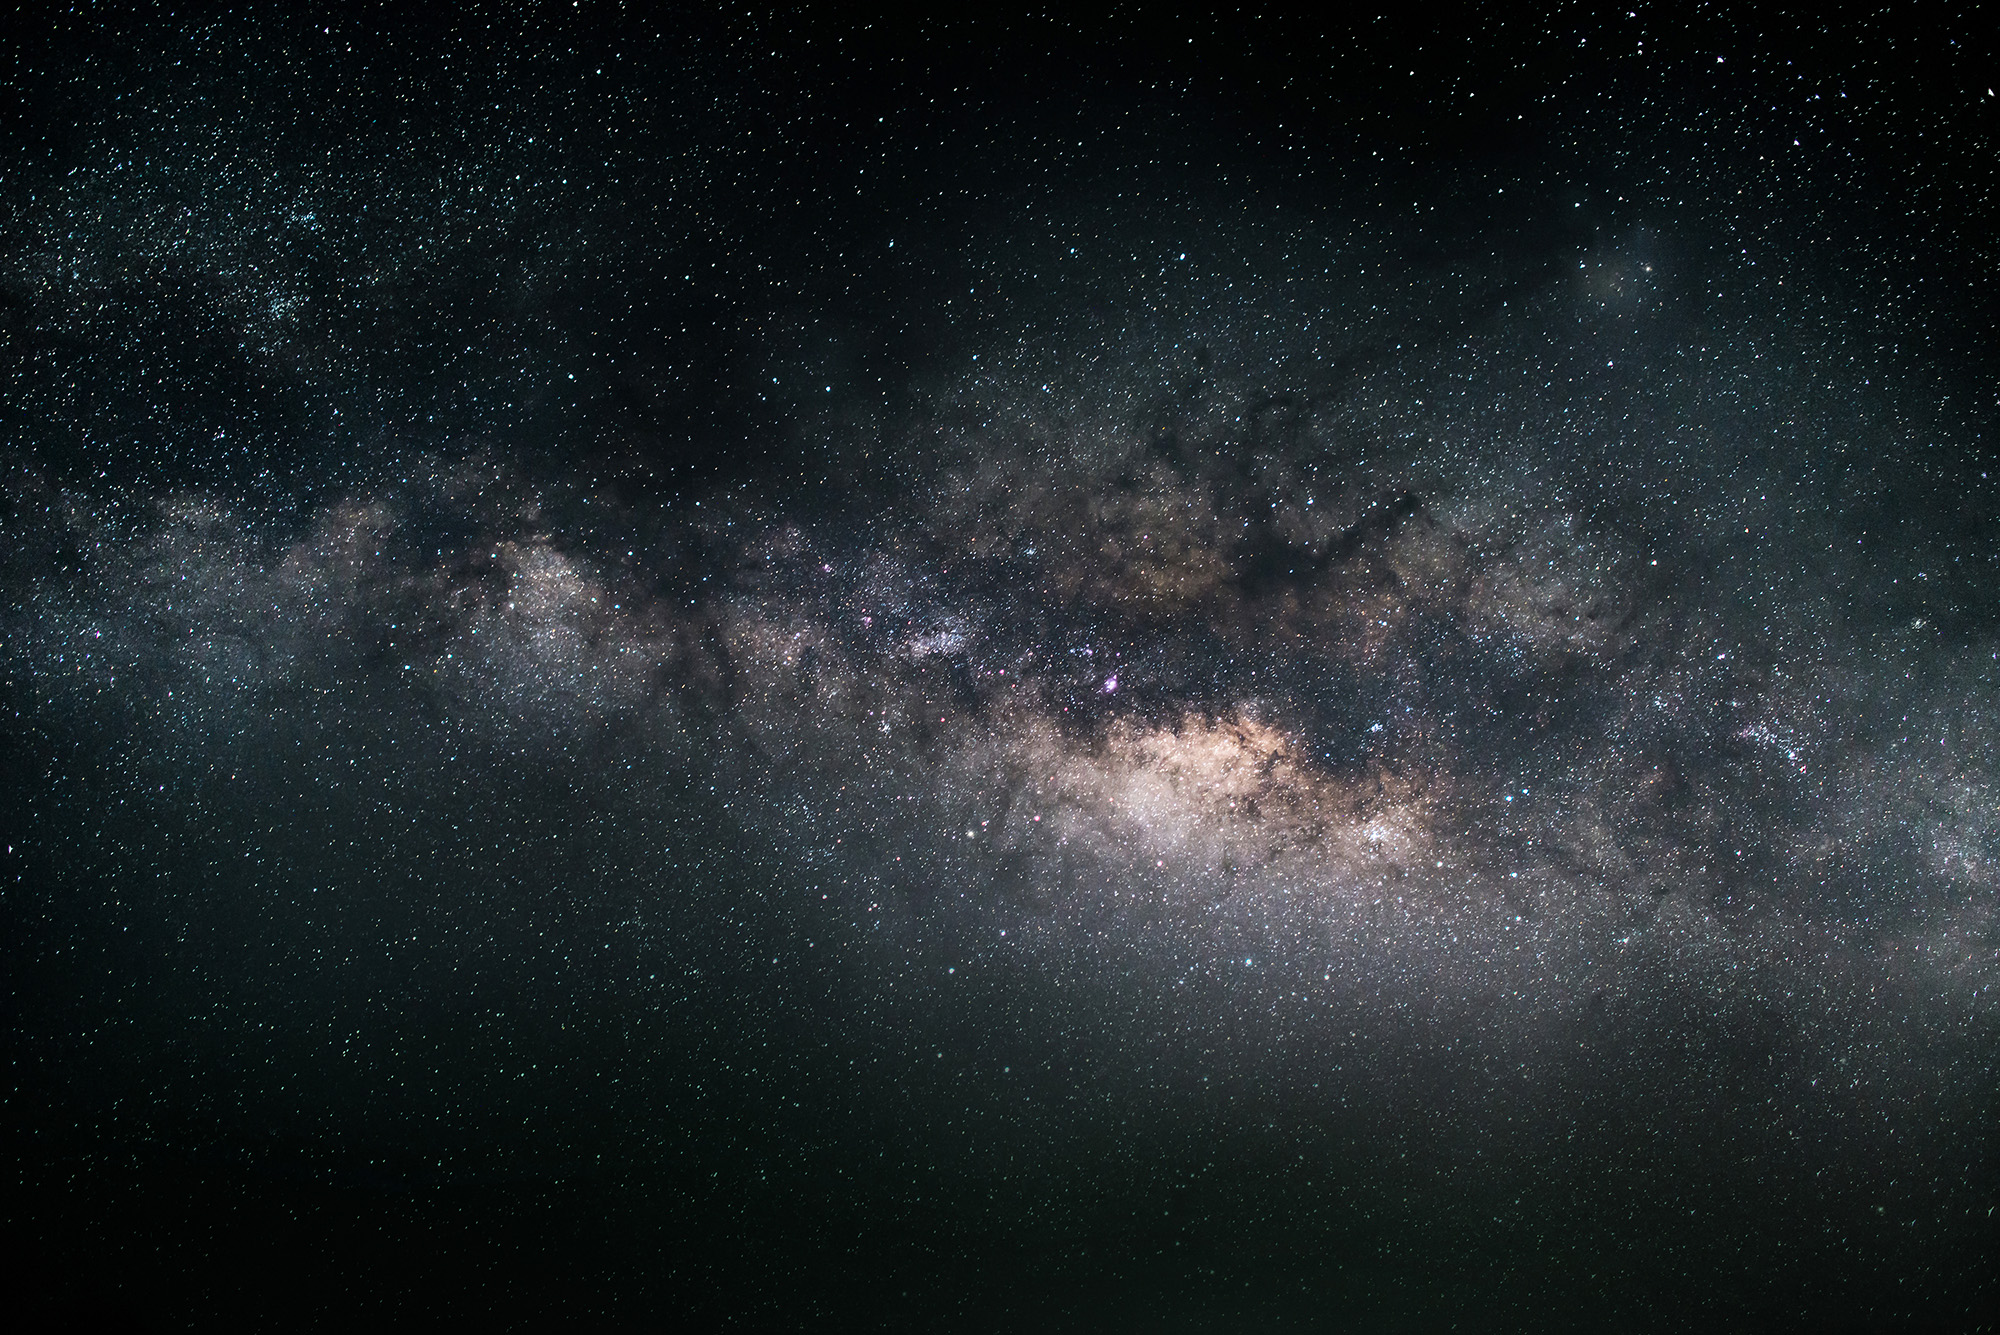 An outerspace view of the milkway in front of a dark star-filled sky